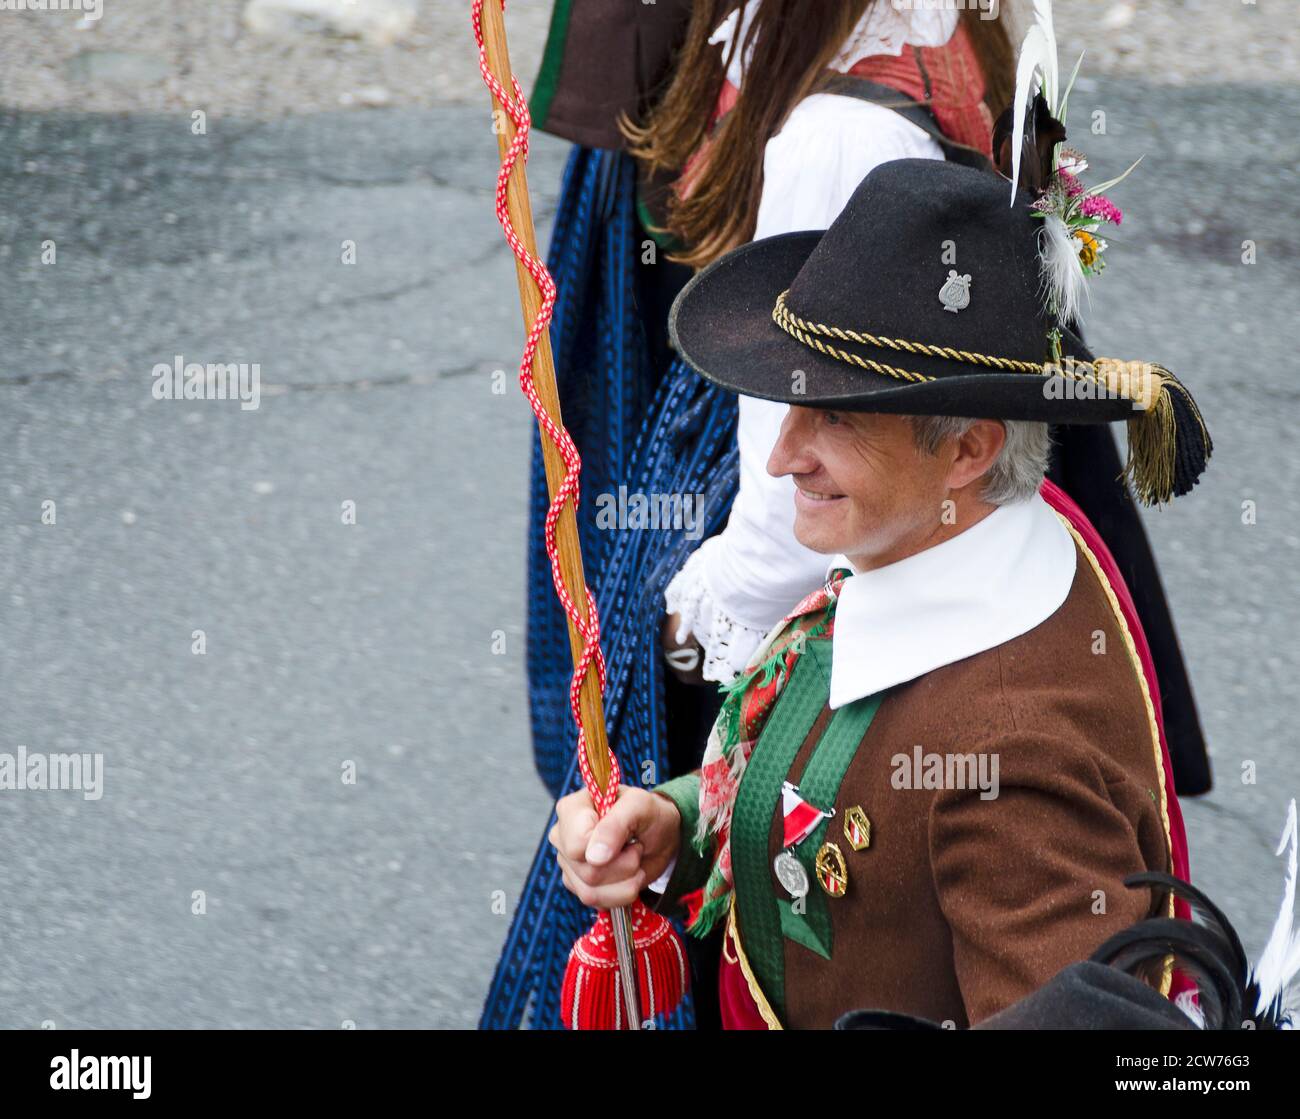 Conductor of the musicband Kartitsch from Tirol at the festival procession in celebration of 200 years of the band in traditional costumes Maria Lugga Stock Photo